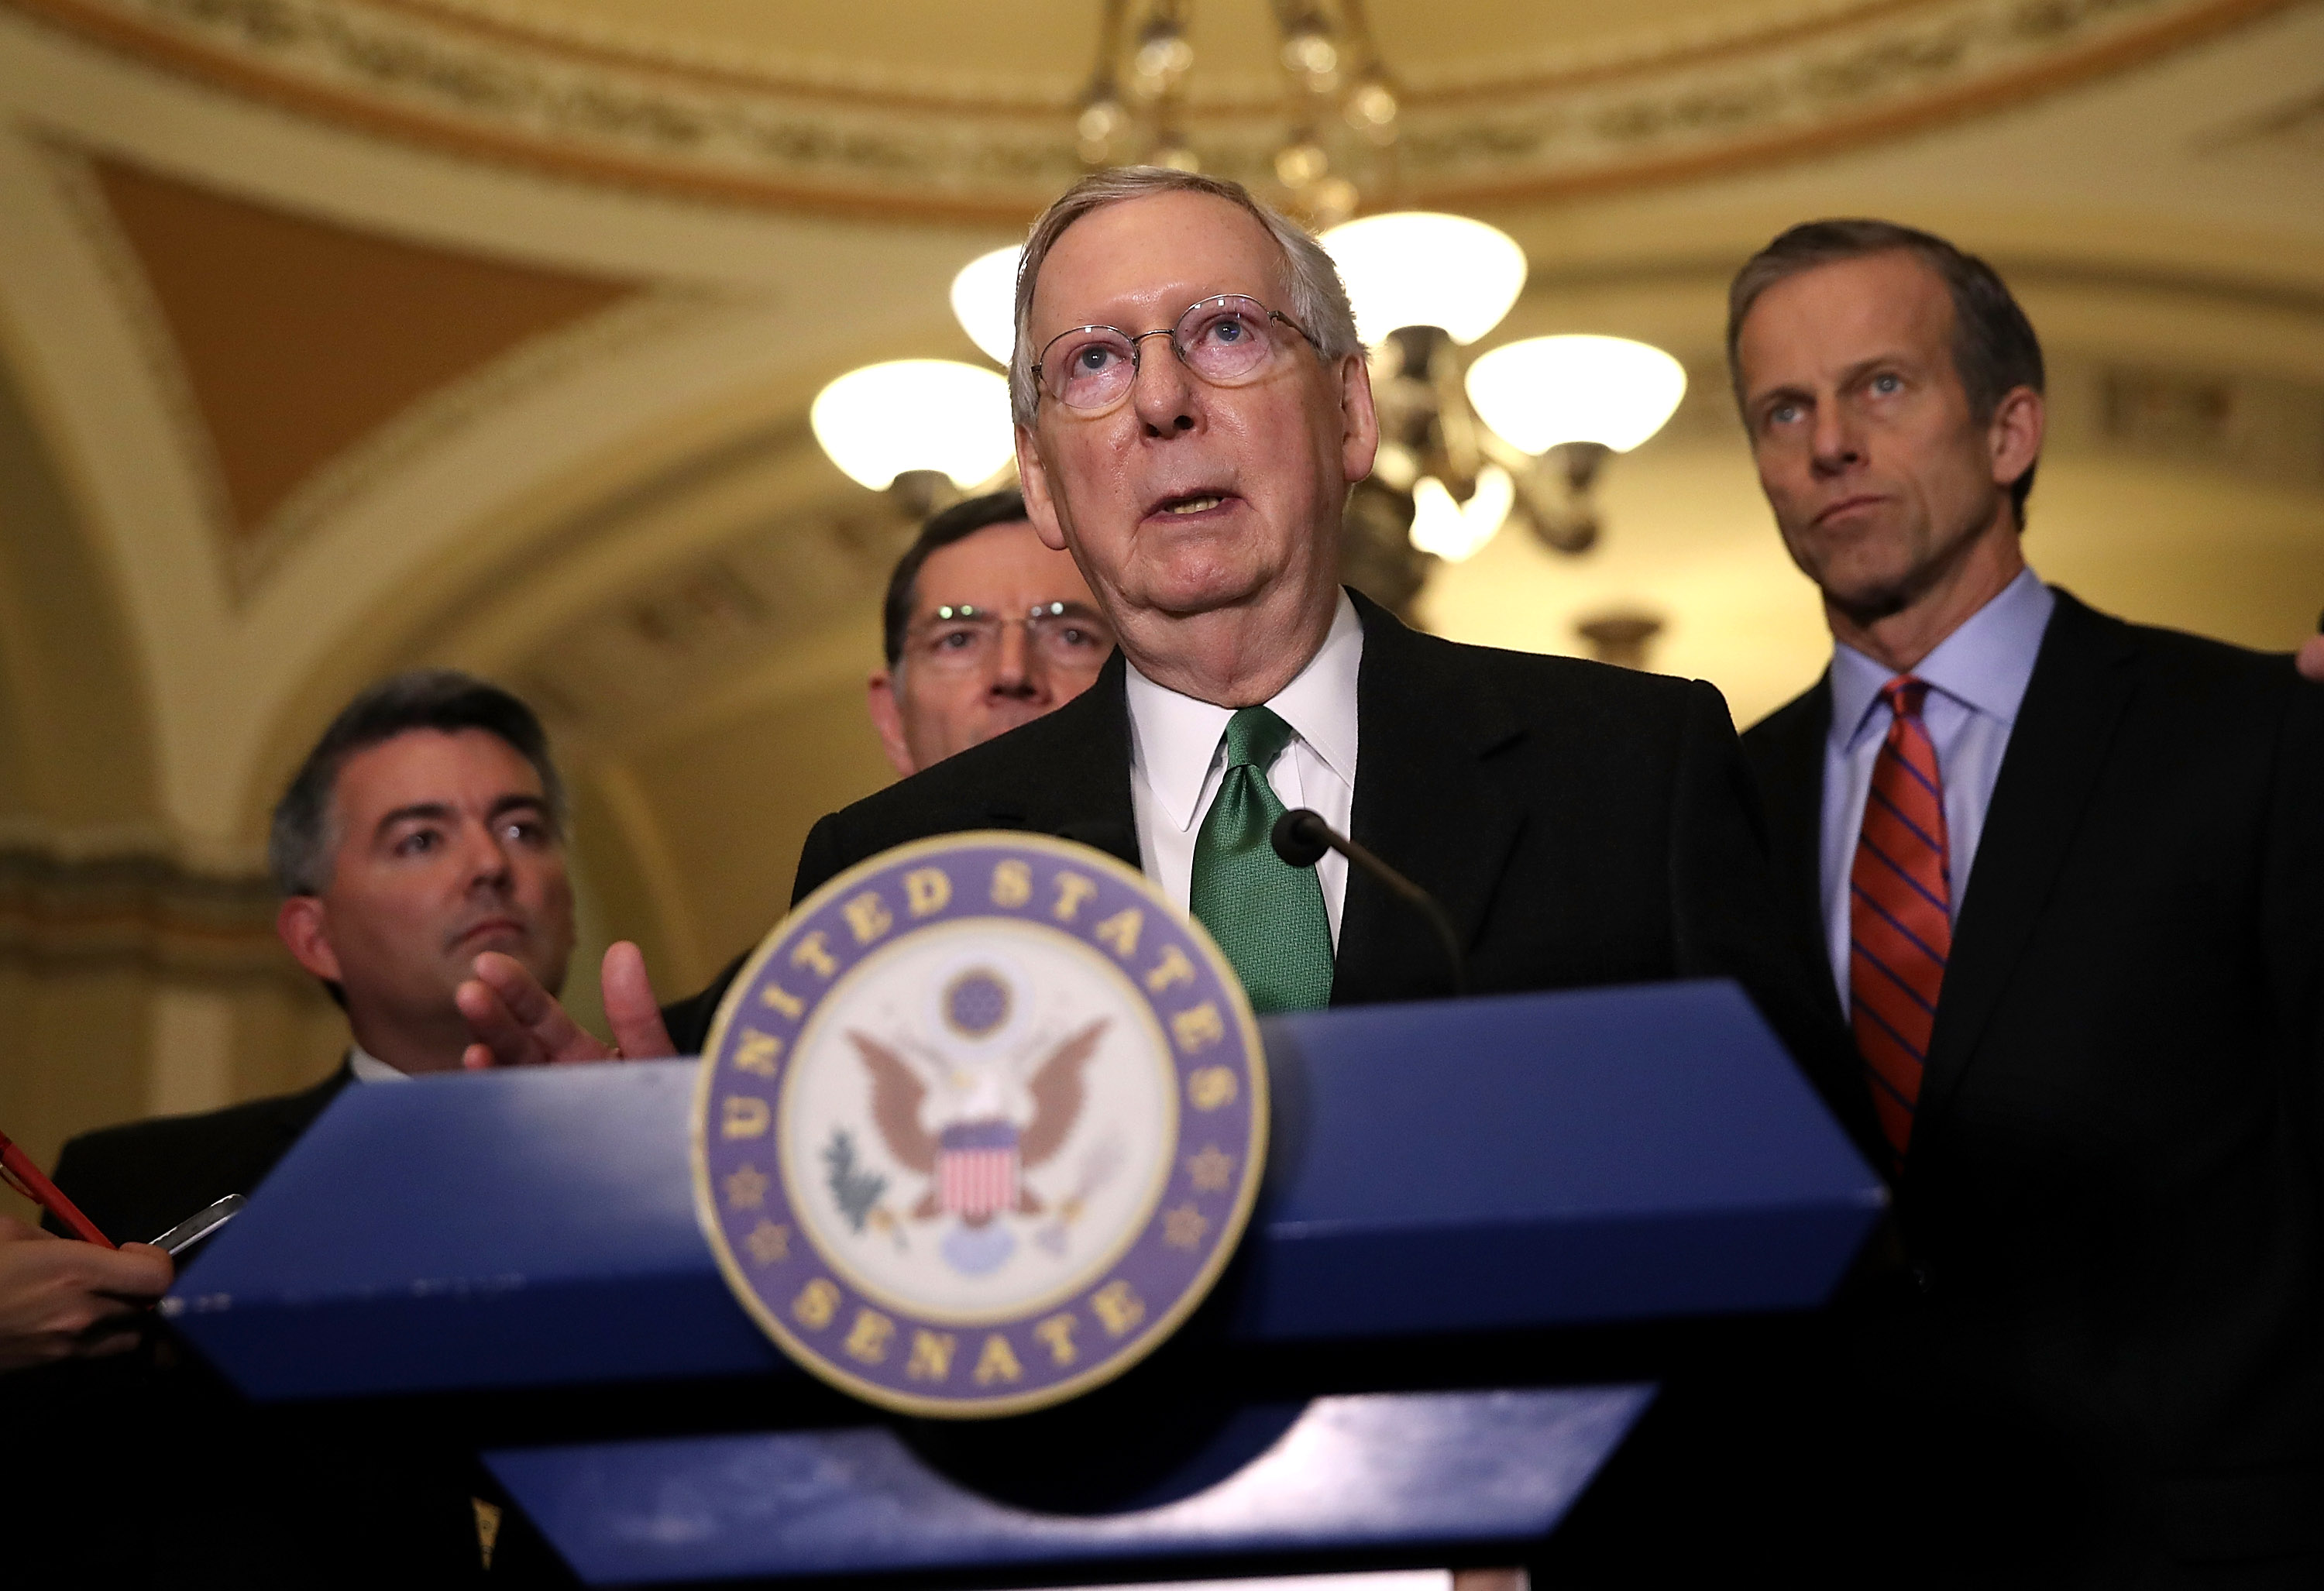 Senate Majority Leader Mitch McConnell (R-KY) speaks to reporters during a news conference on Capitol Hill following a policy lunch on March 7, 2017 in Washington, DC. (Justin Sullivan&mdash;Getty Images)